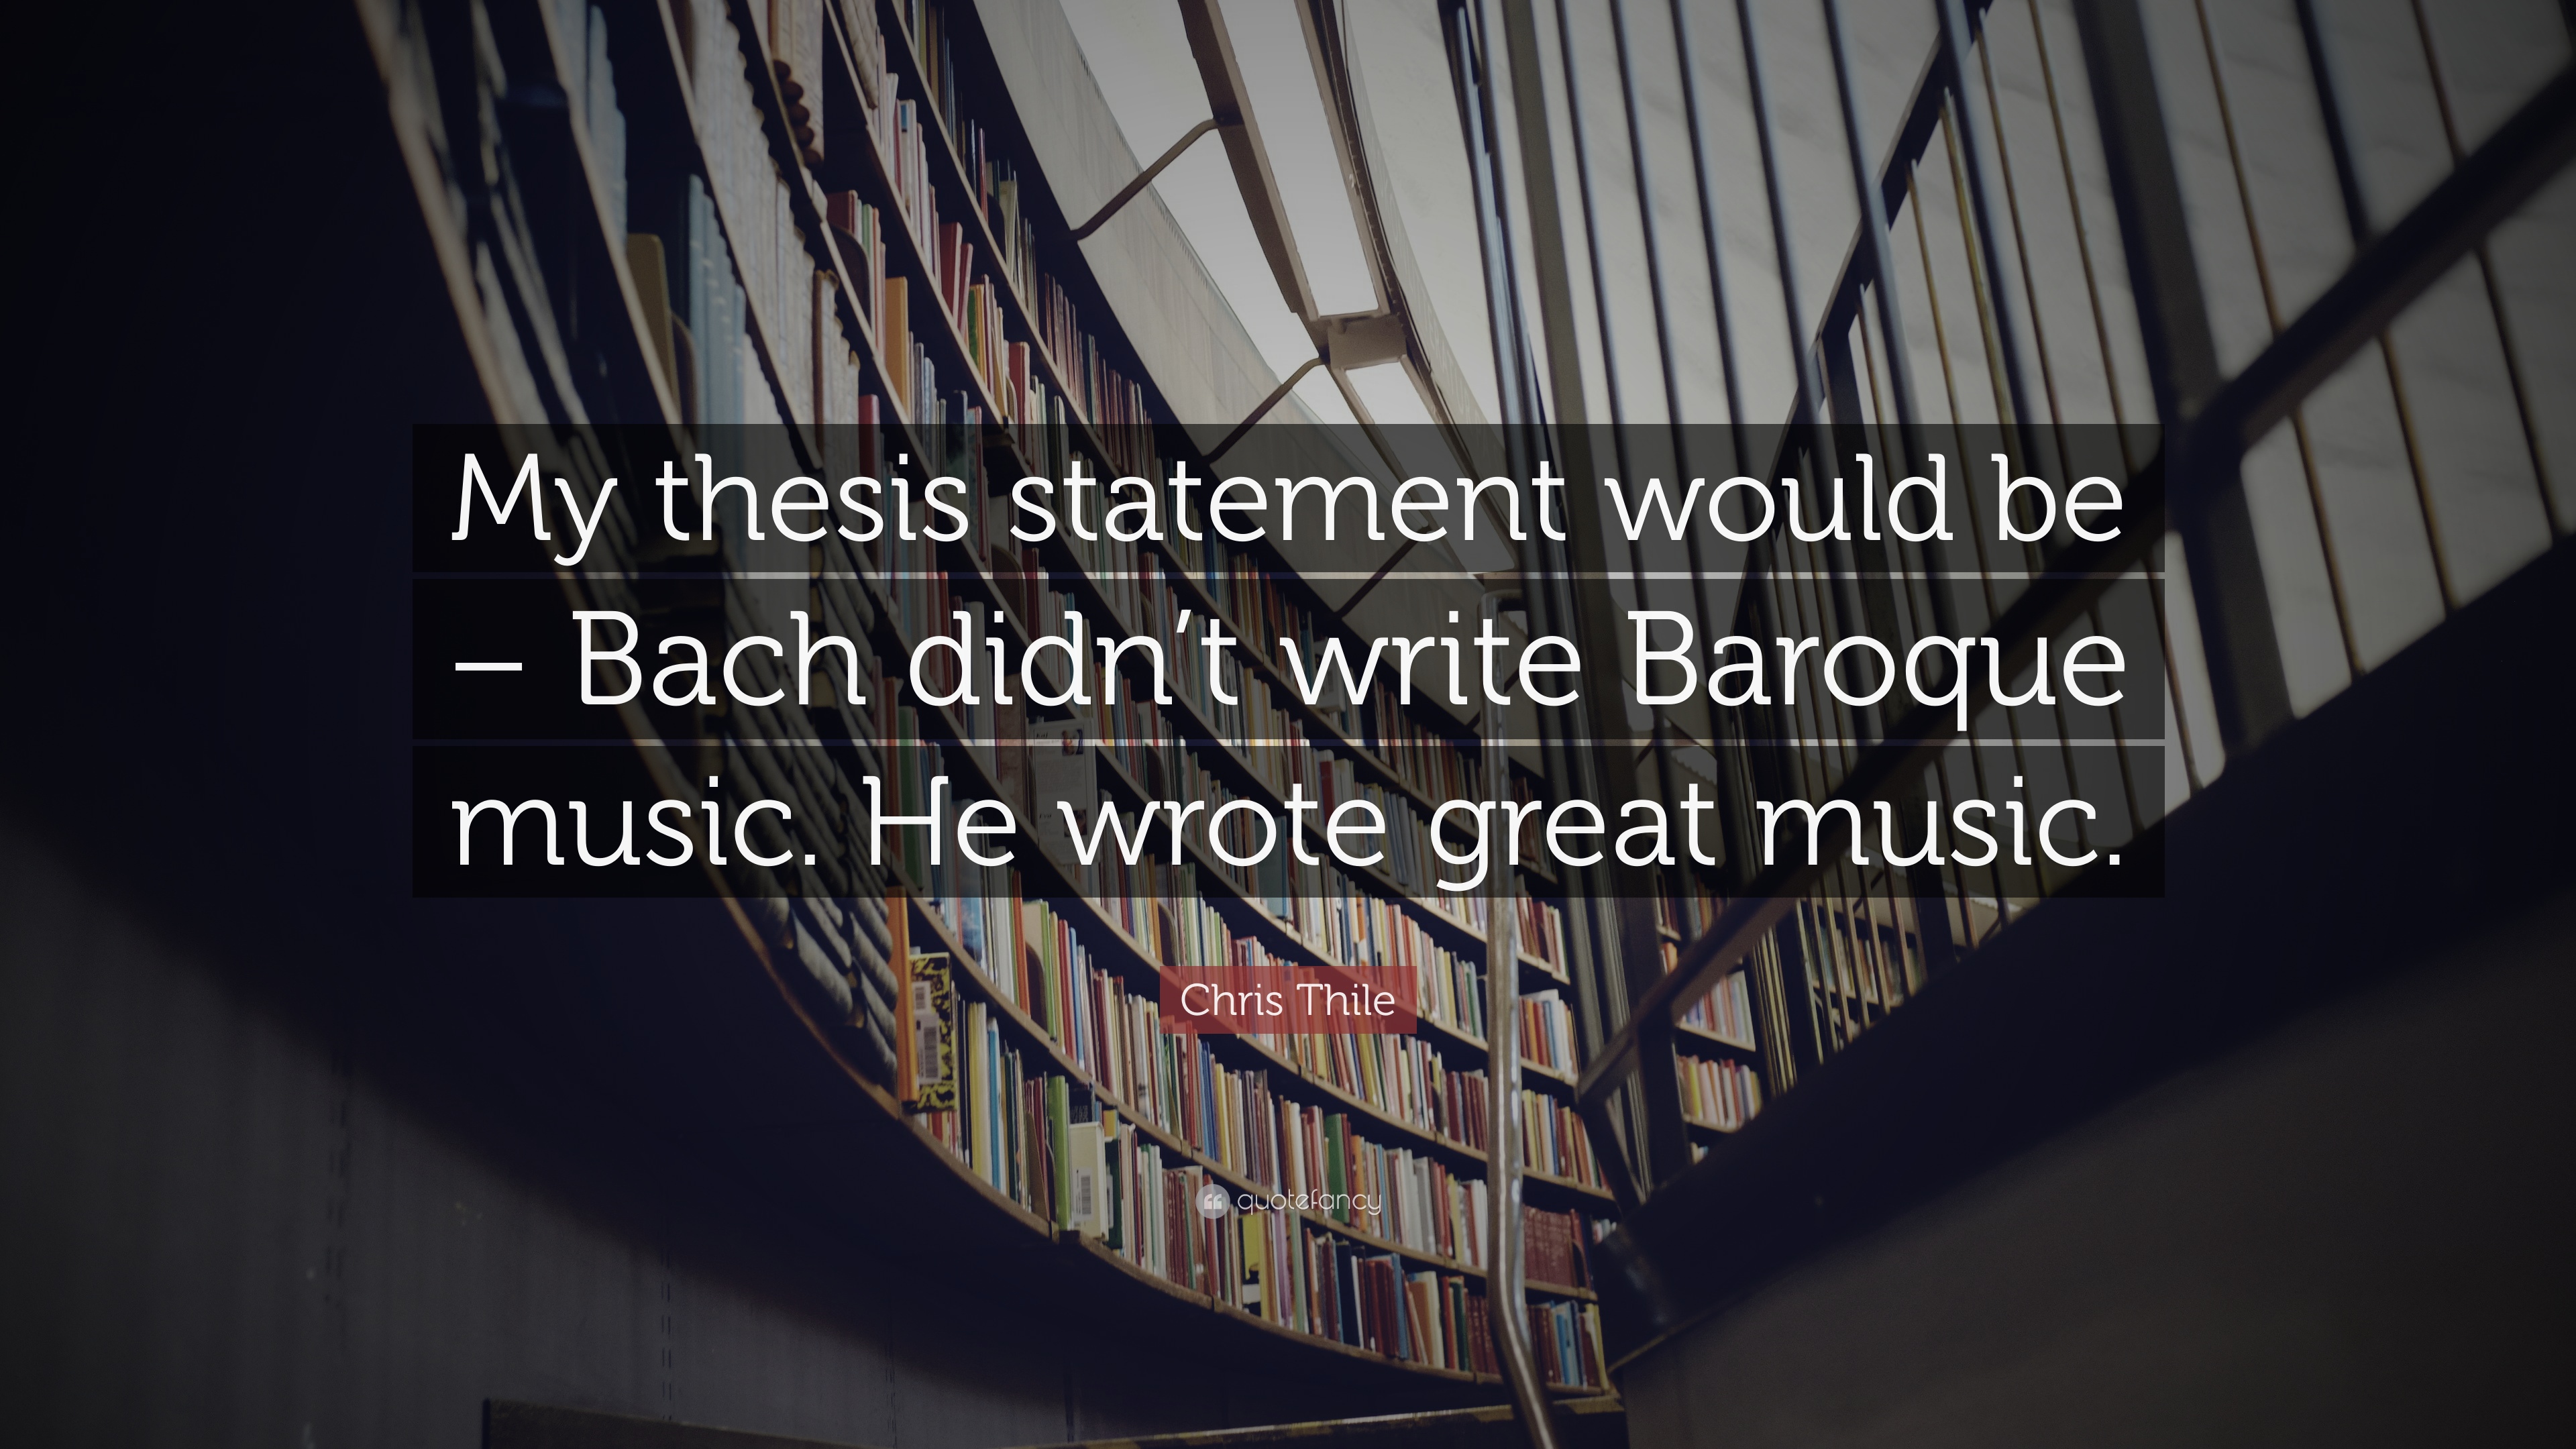 Chris Thile Quote: “My thesis statement would be